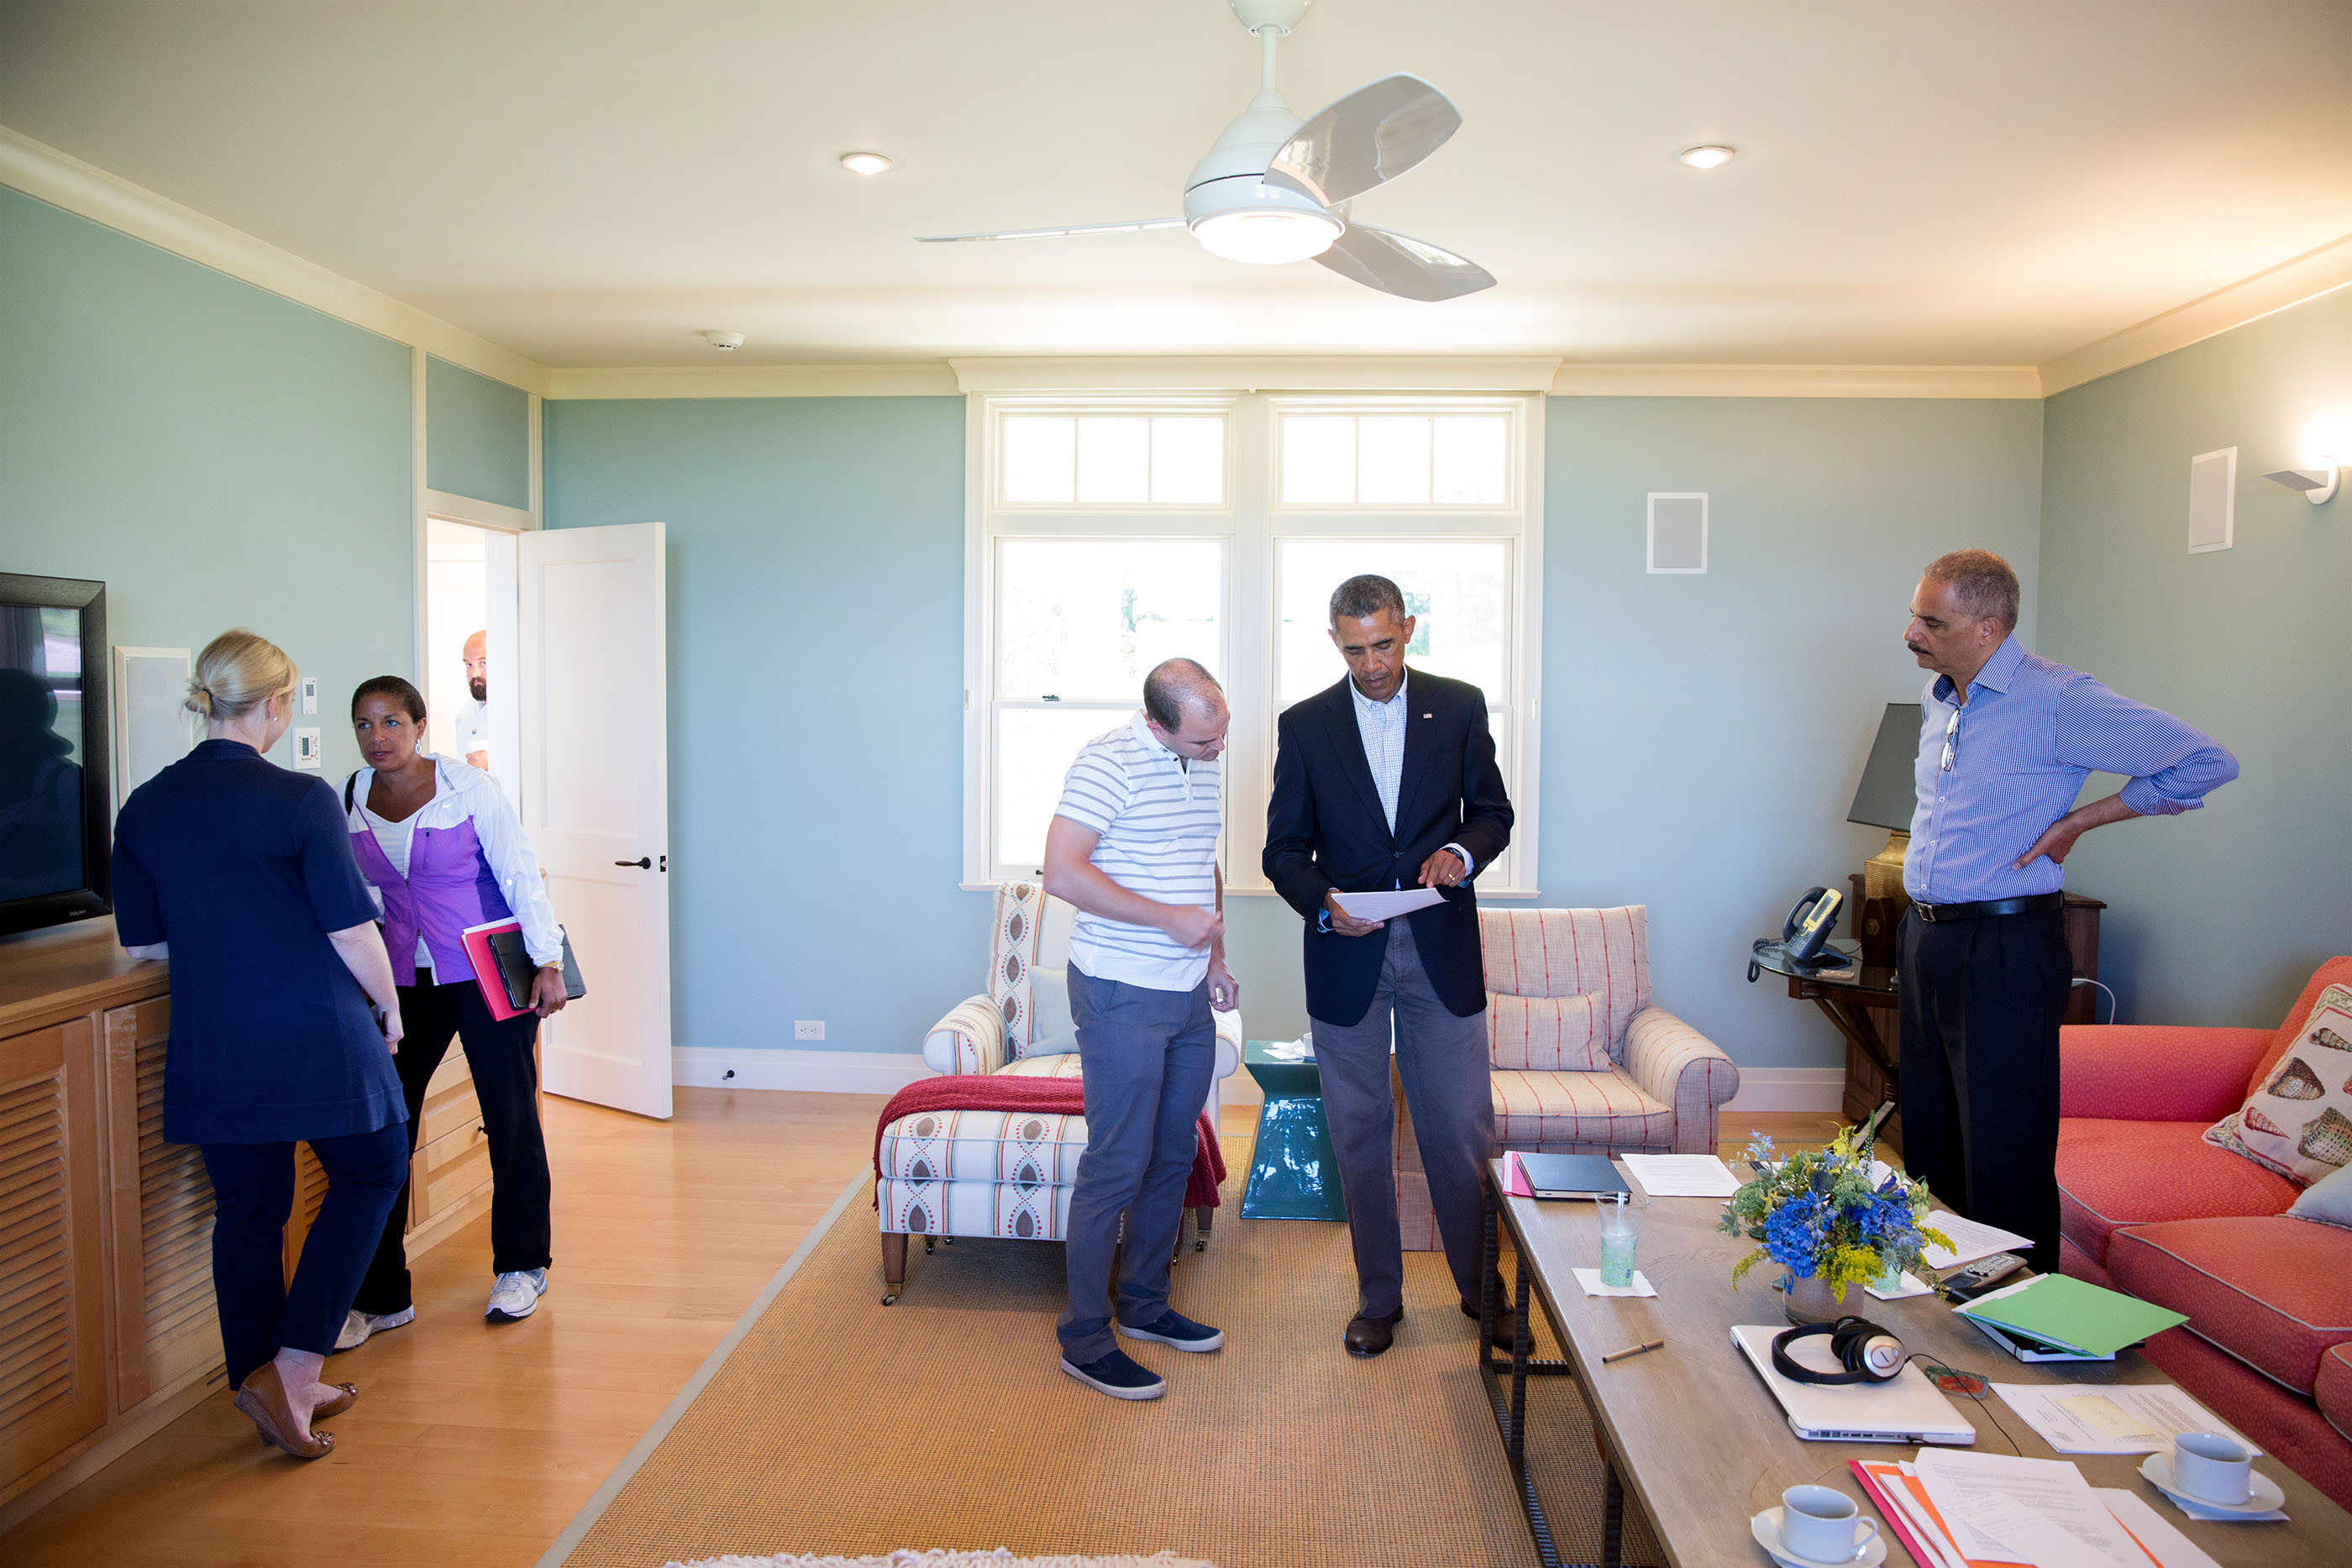 Massachusetts, Aug. 14, 2014. Discussing the situation in Ferguson, Missouri, while on vacation in Martha's Vineyard. (Official White House Photo by Pete Souza)